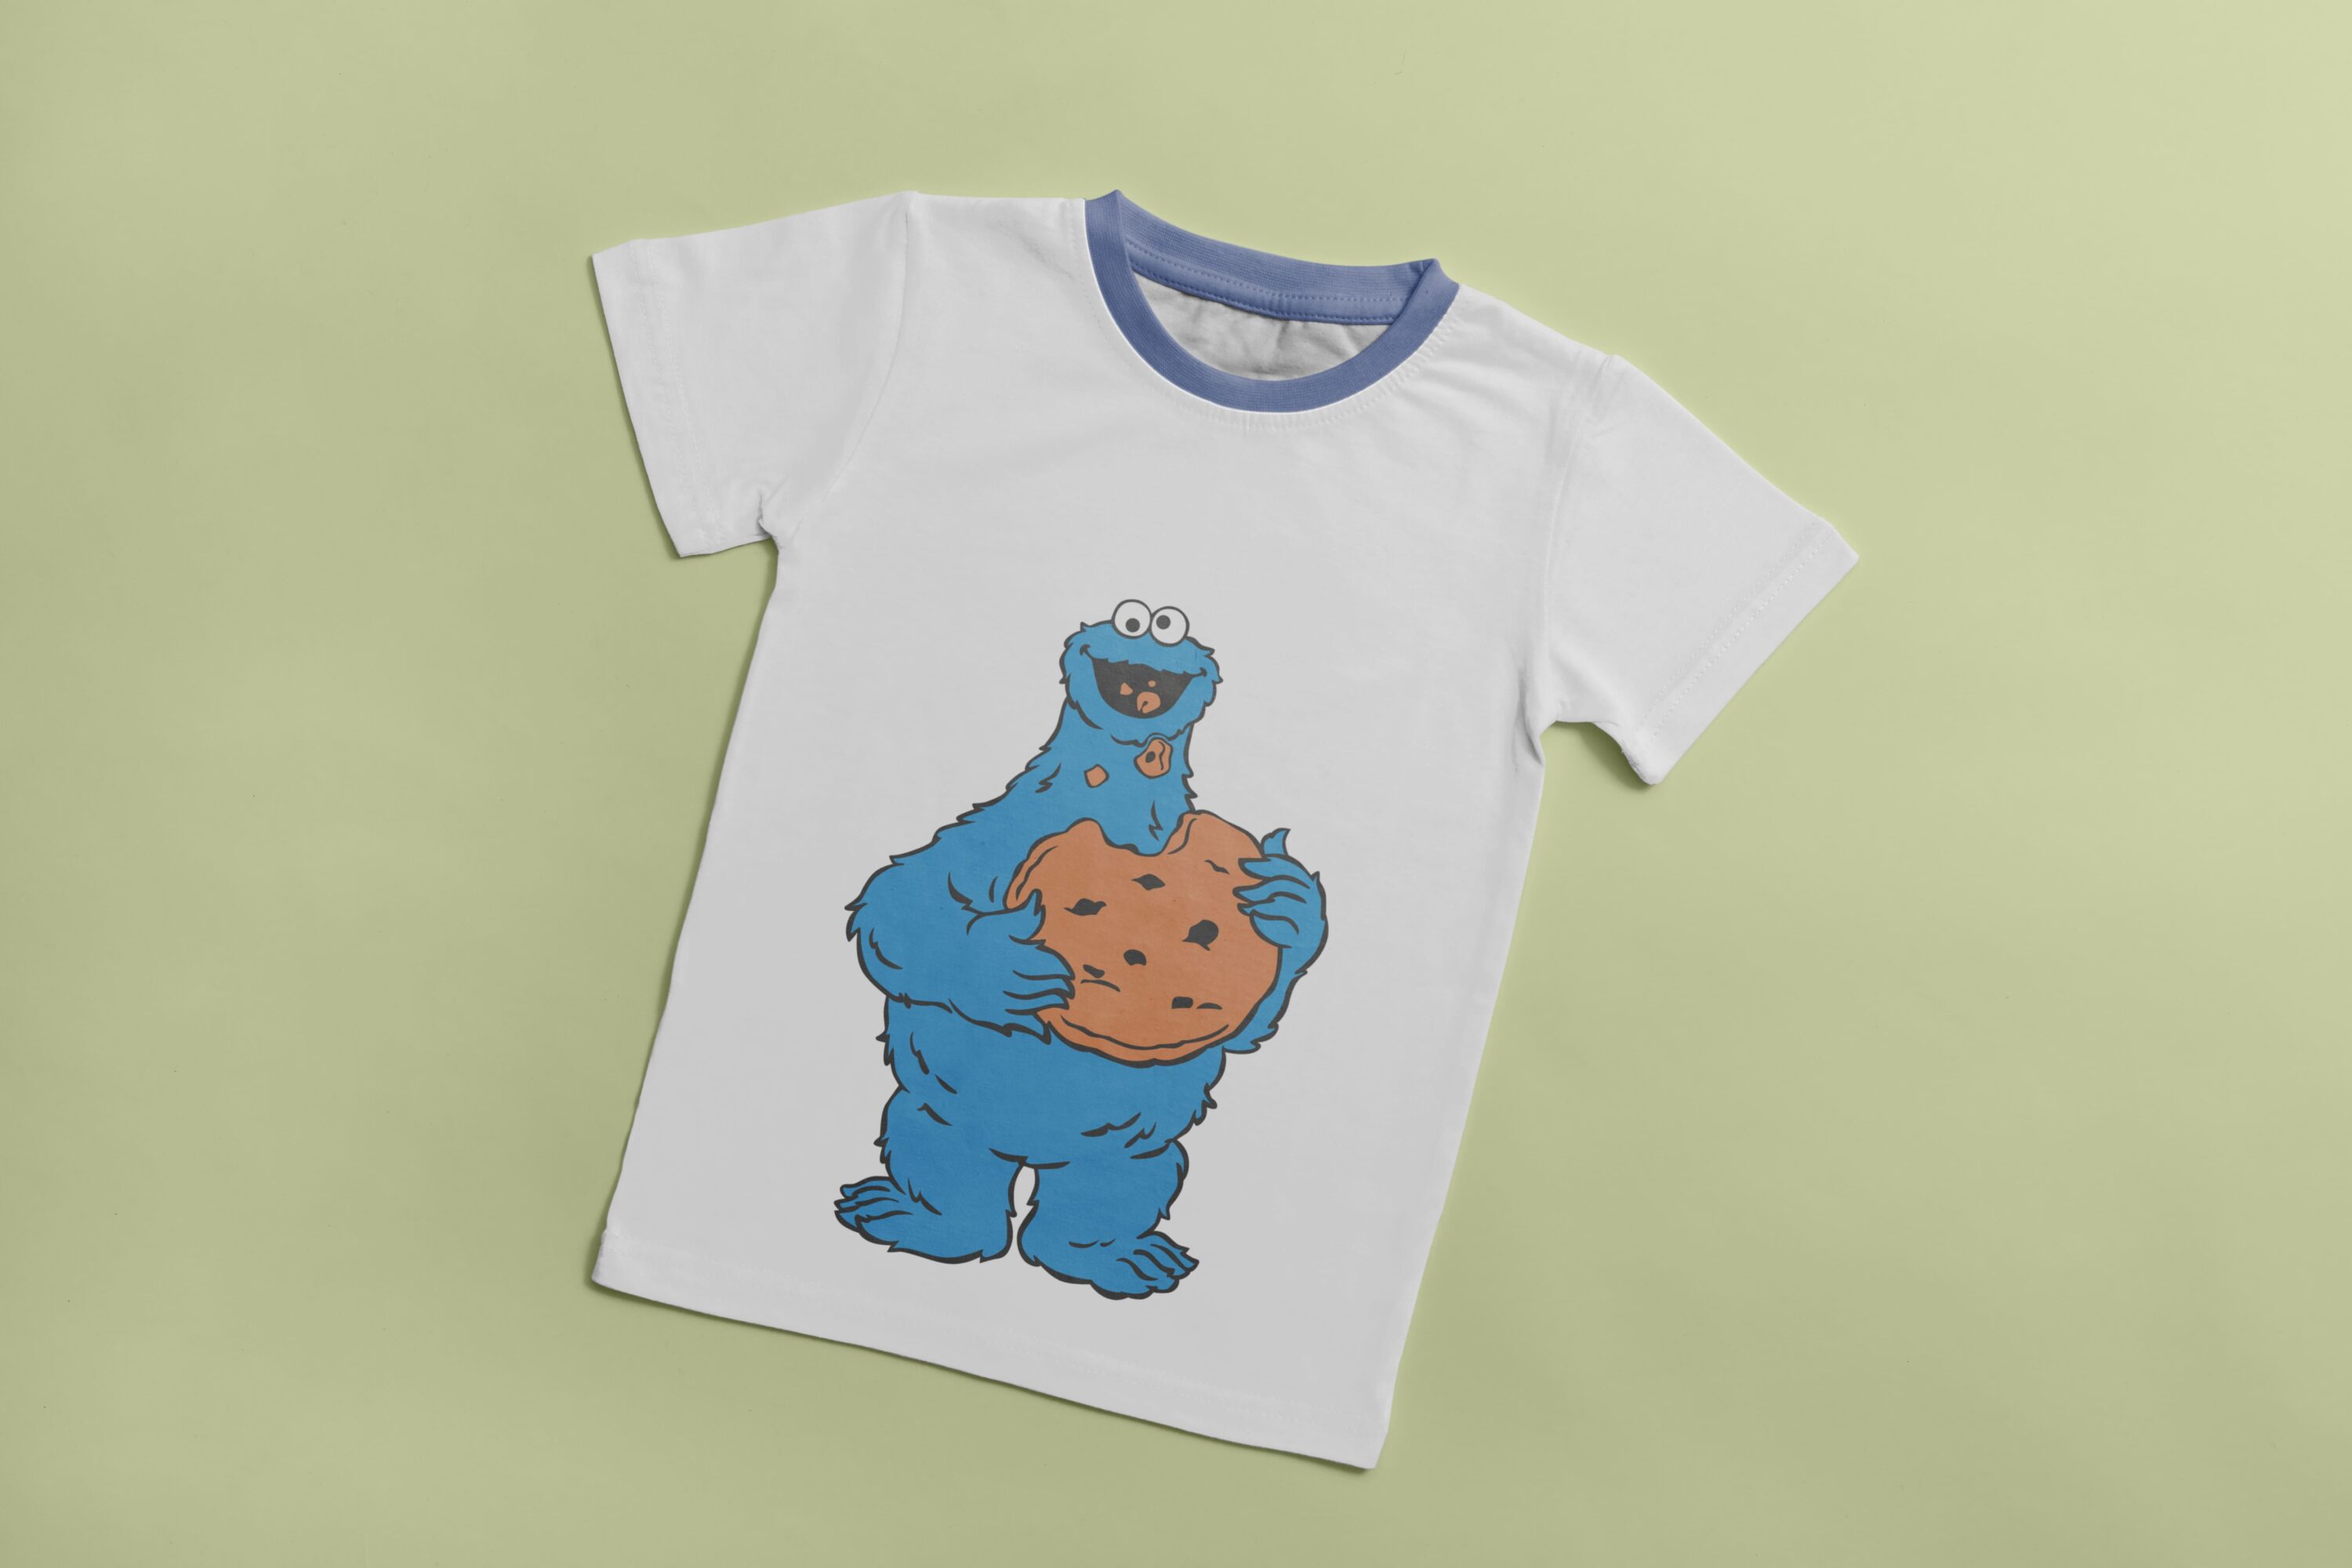 White T-shirt with a blue collar and an image of a blue Cookie Monster, who eats cookie.